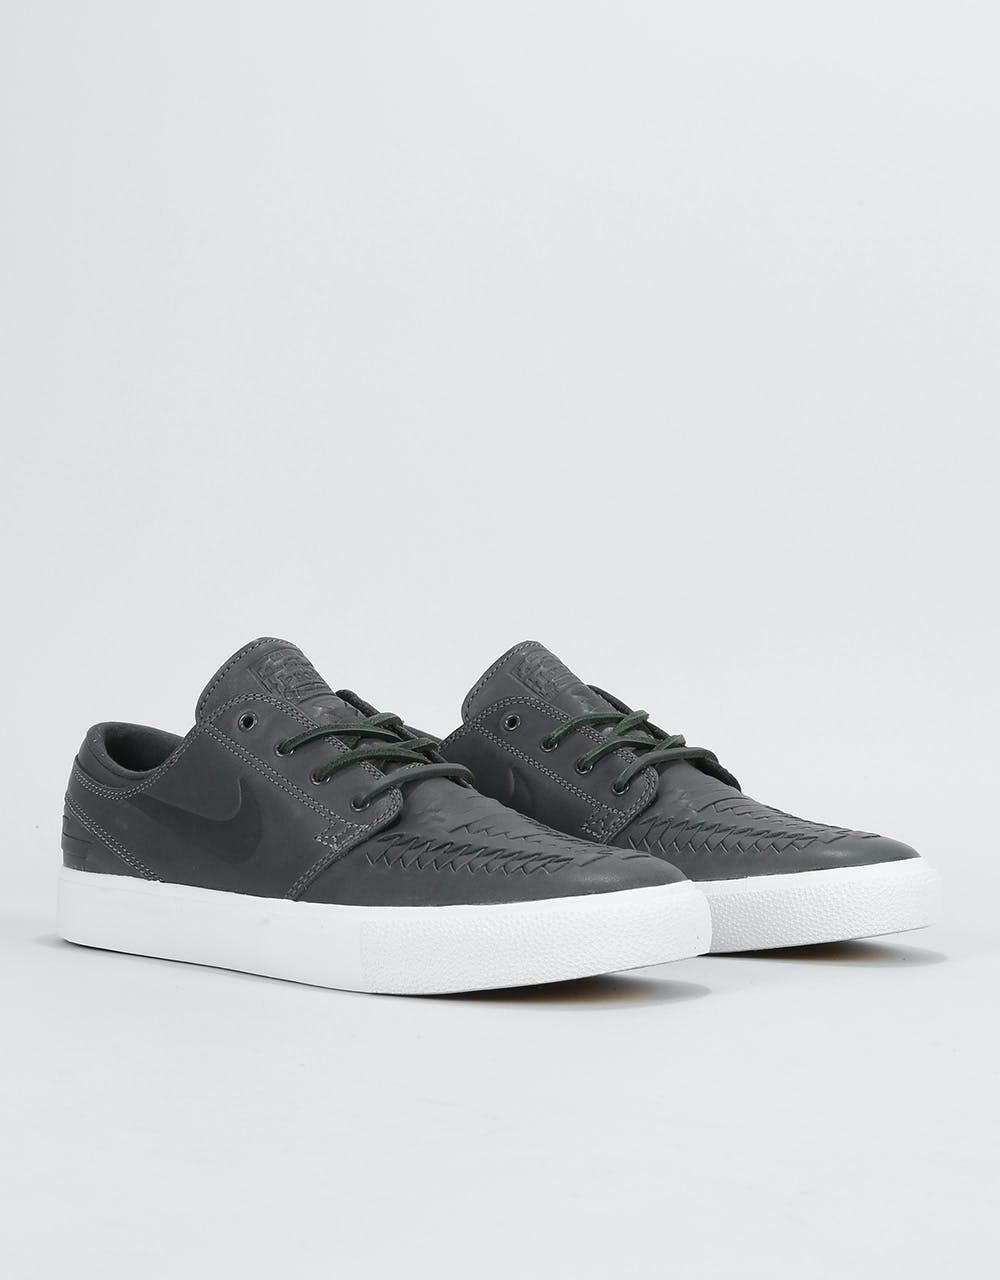 Nike SB Zoom Janoski RM Crafted Skate Shoes - Anthracite/White